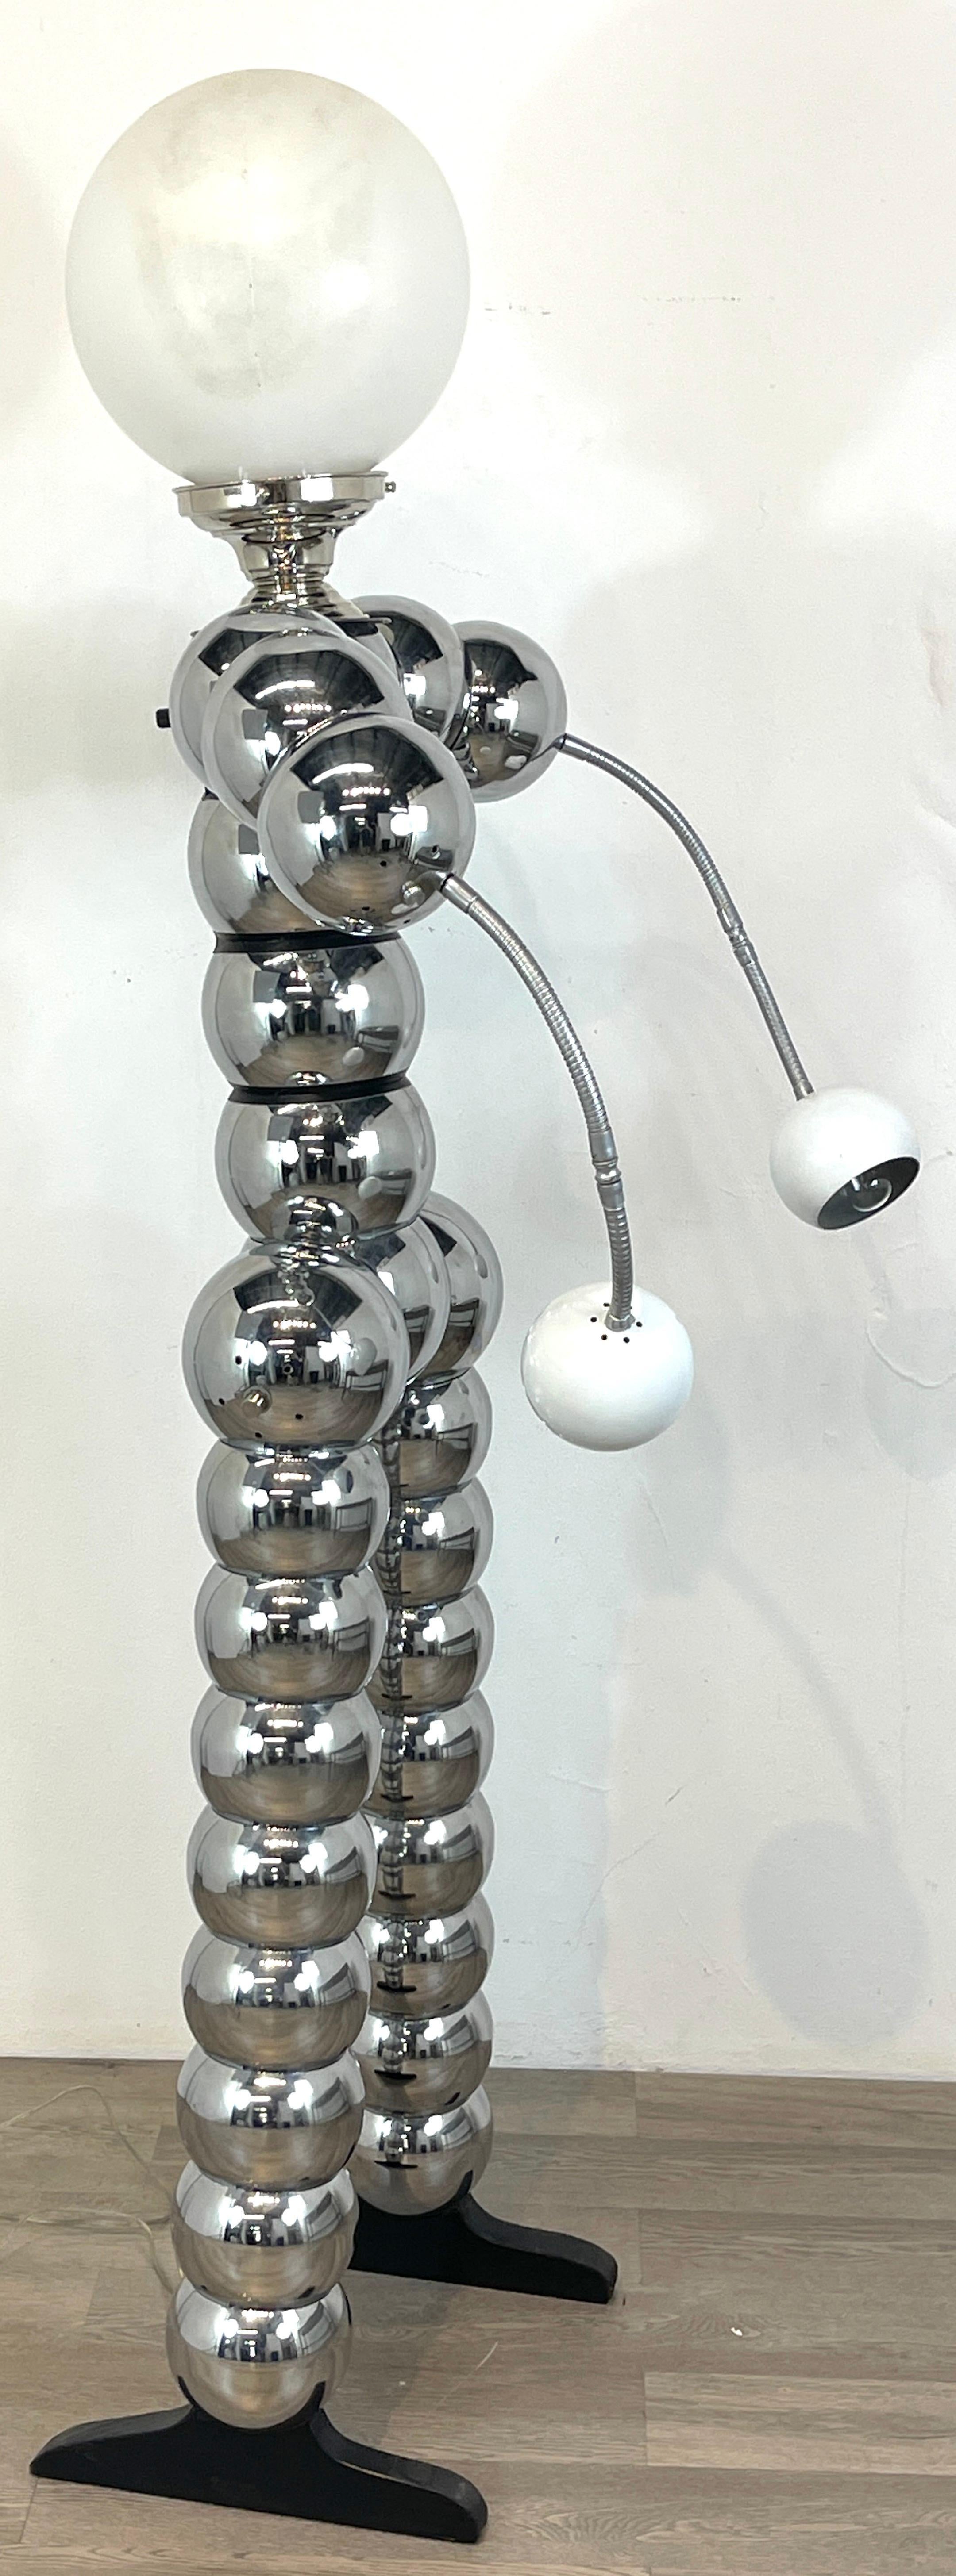 Chrome Stacked Ball Articulated Robot Floor Lamp Attributed to George Kovacs 3